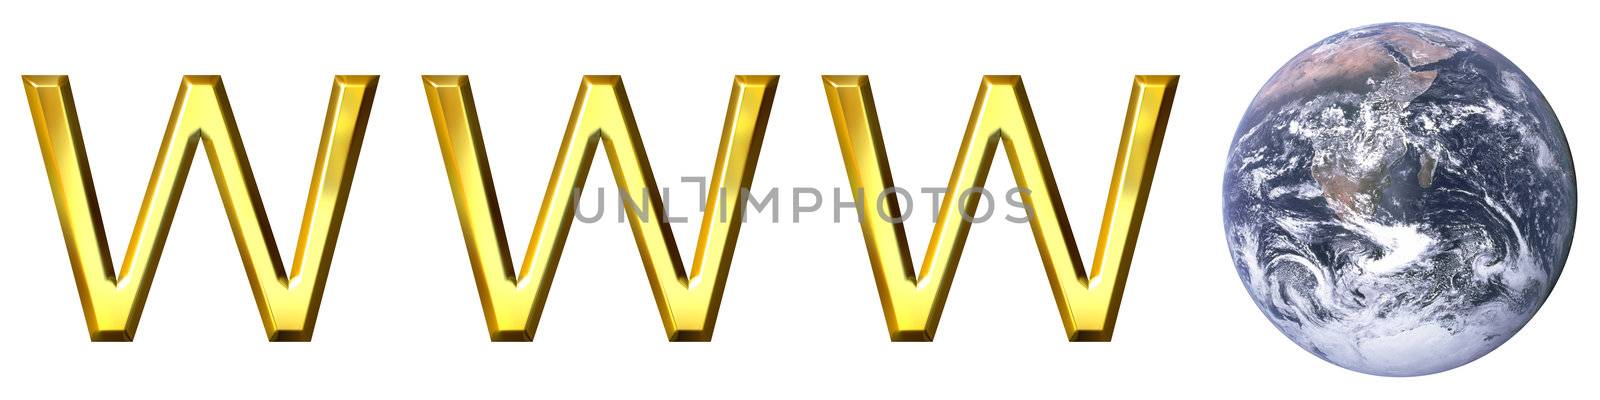 World wide web concept isolated in white